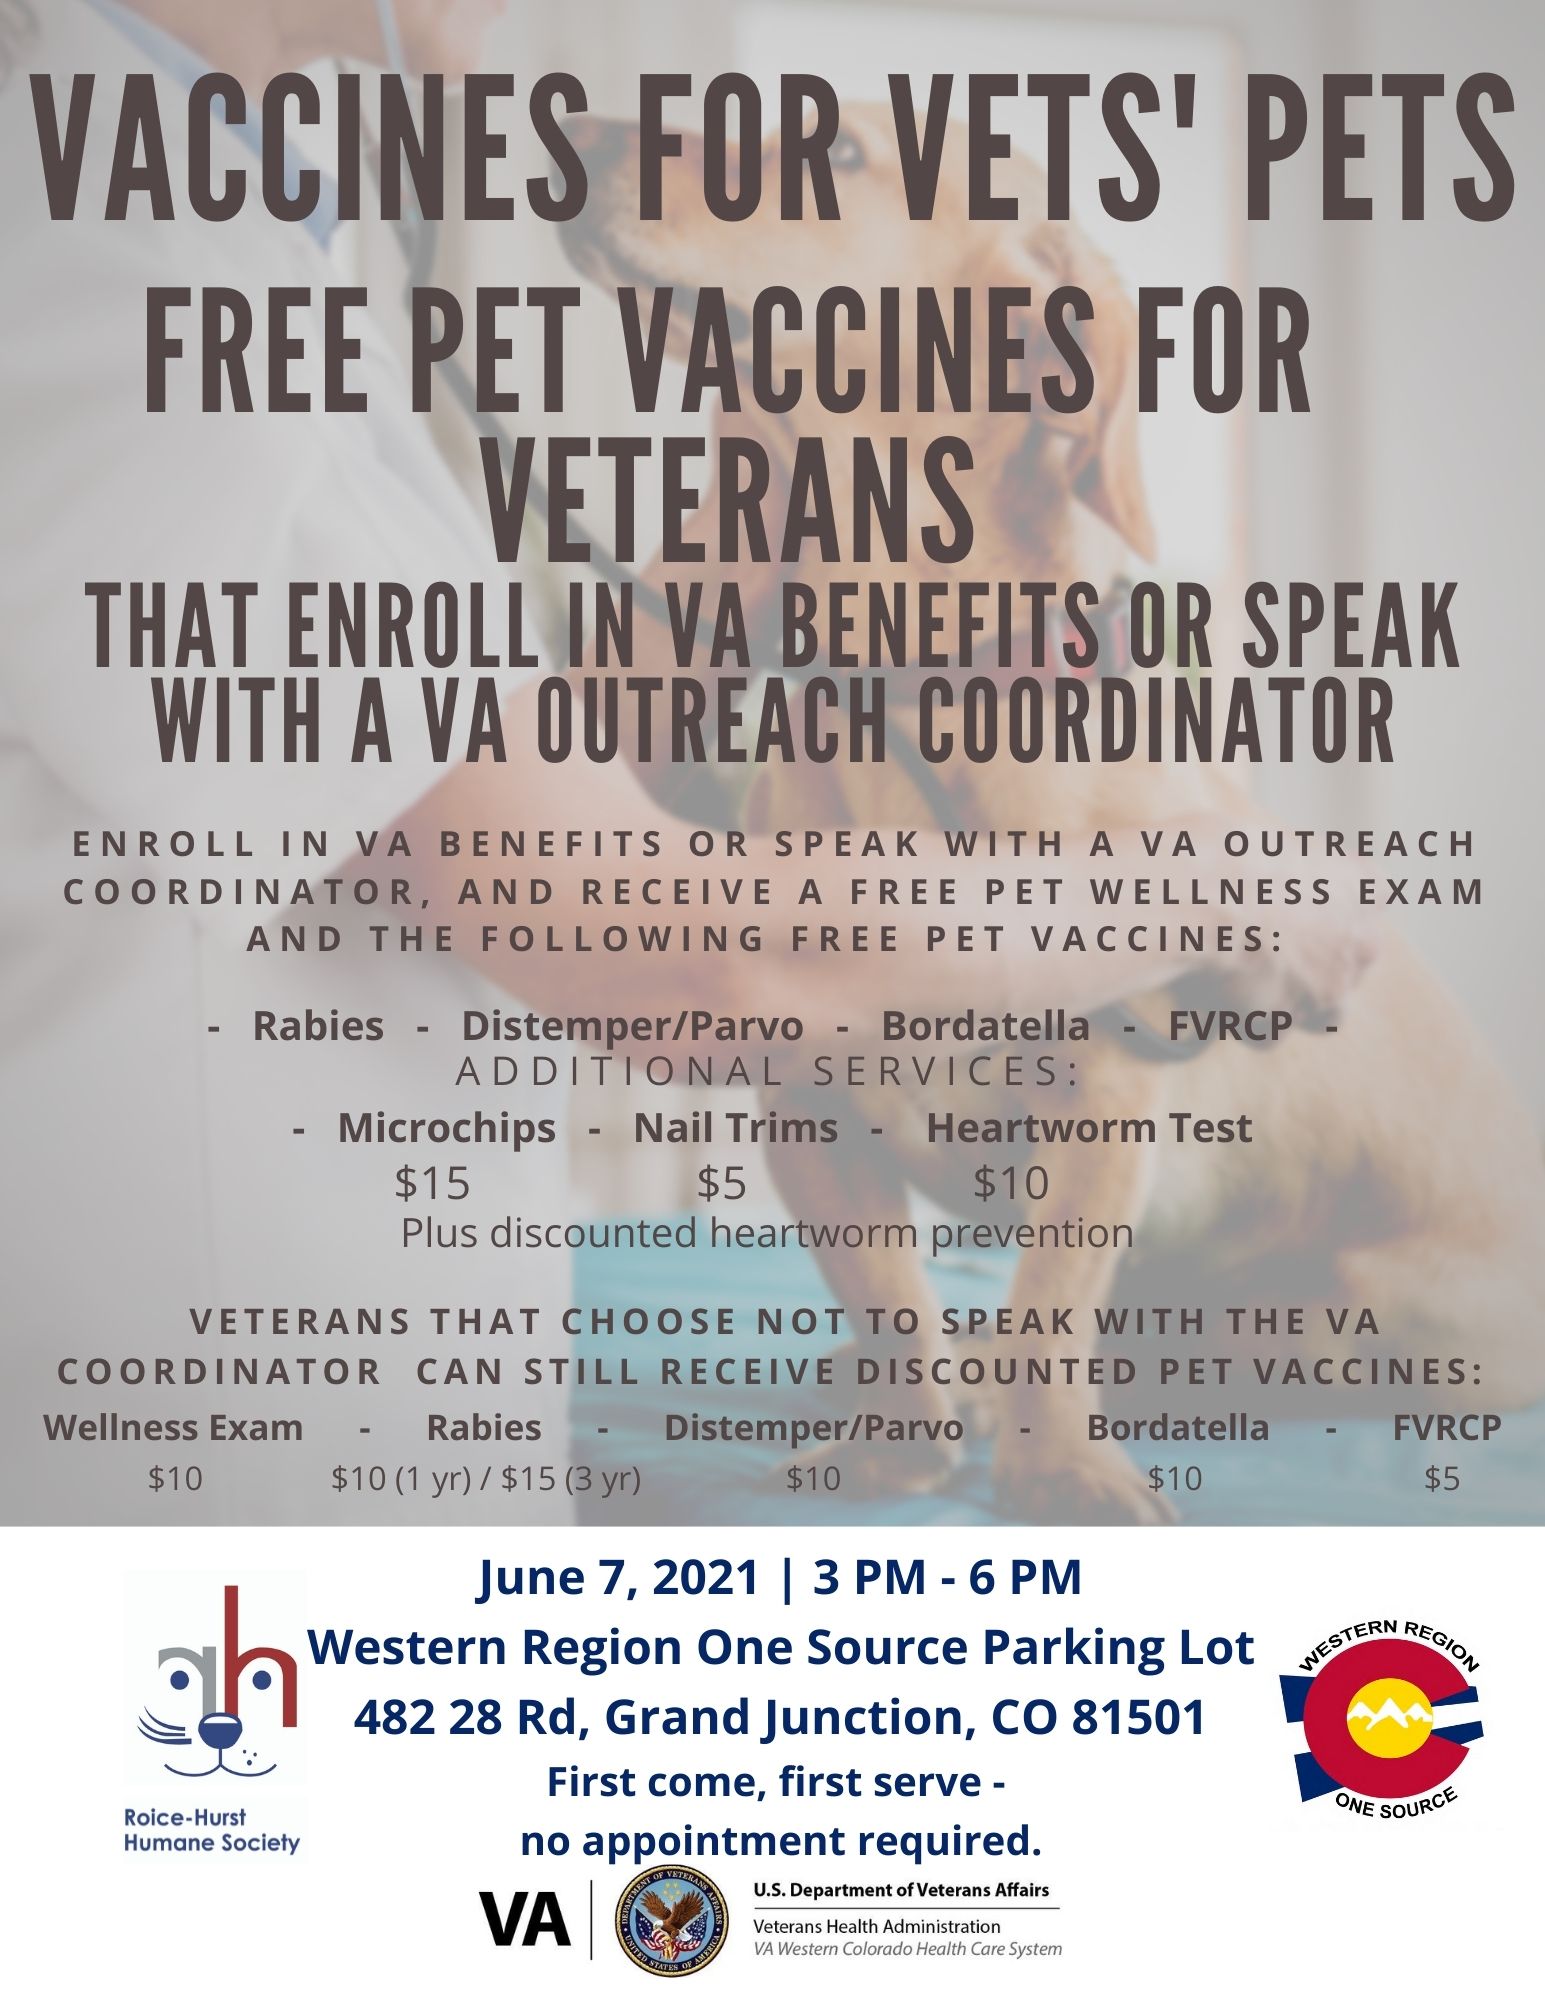 Vaccines for Vets' Pets